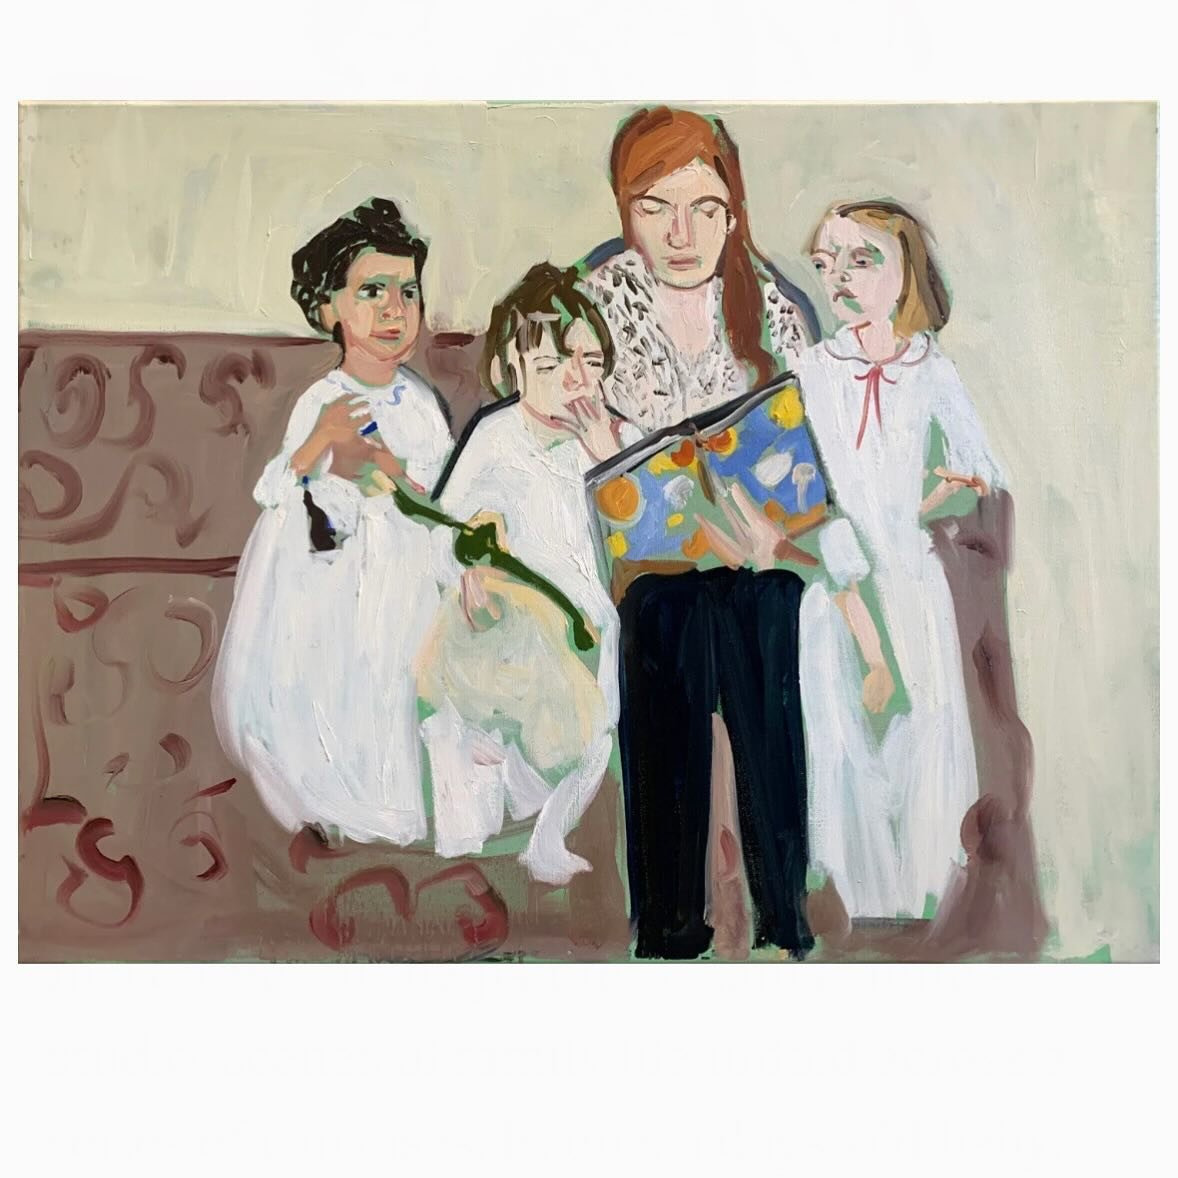 Chantal Joffe, &ldquo;Story&rdquo; 2020.

From the great English empath Chantal Joffe, a beautiful reminder that every day is Mother&rsquo;s Day 🥰.

#mothersday #momlife #mom #grateful #womenartists #painting #chantaljoffe